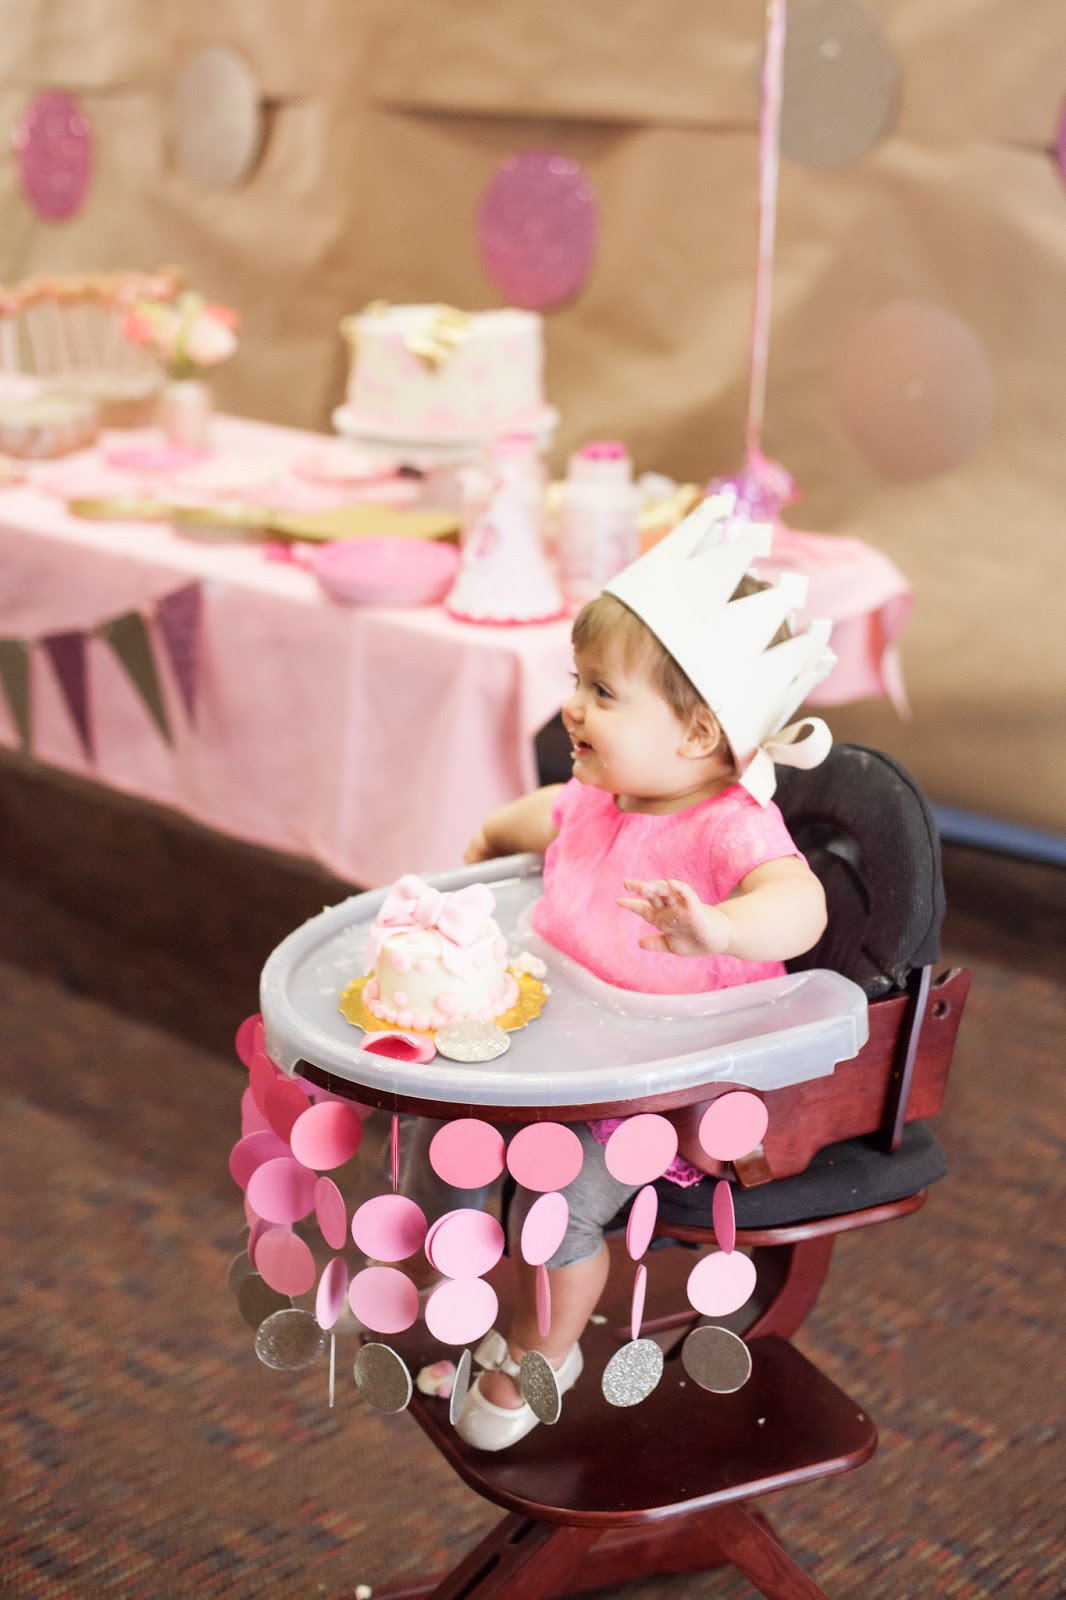 Baby Girl First Birthday Decoration Ideas
 Nat your average girl 1st birthday party decor